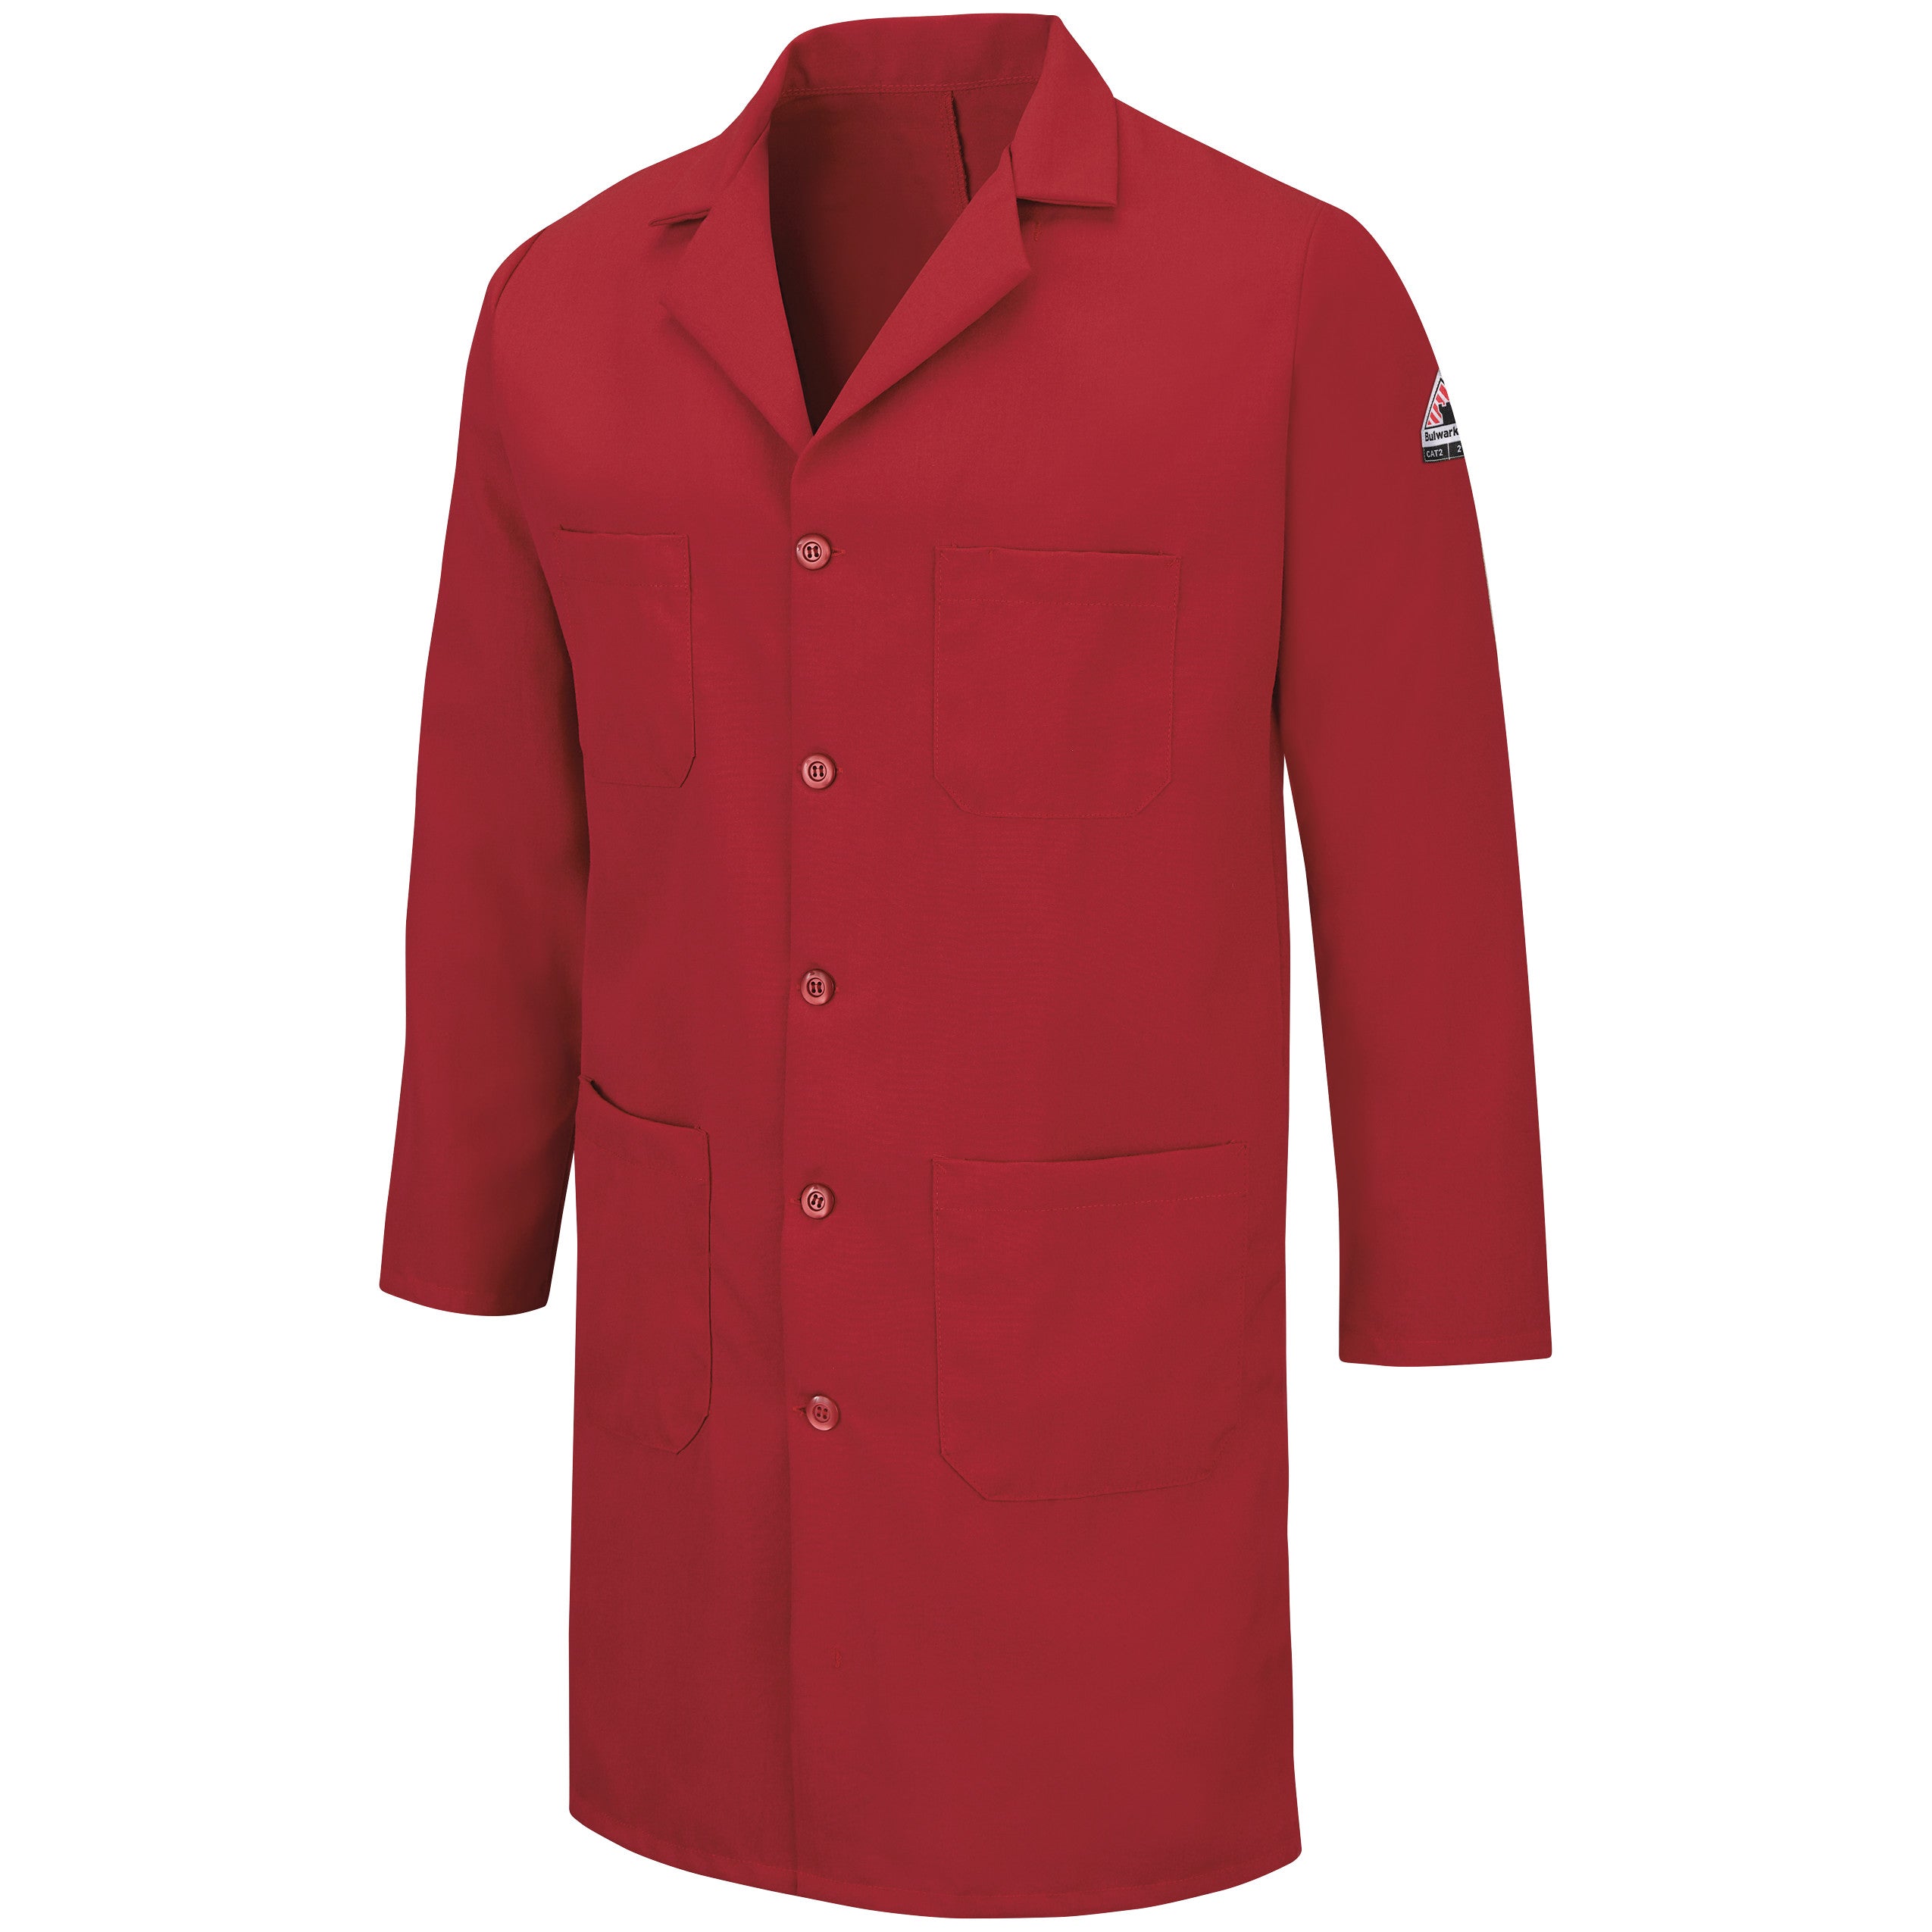 Coverings - Lab Coat KNL2 - Red